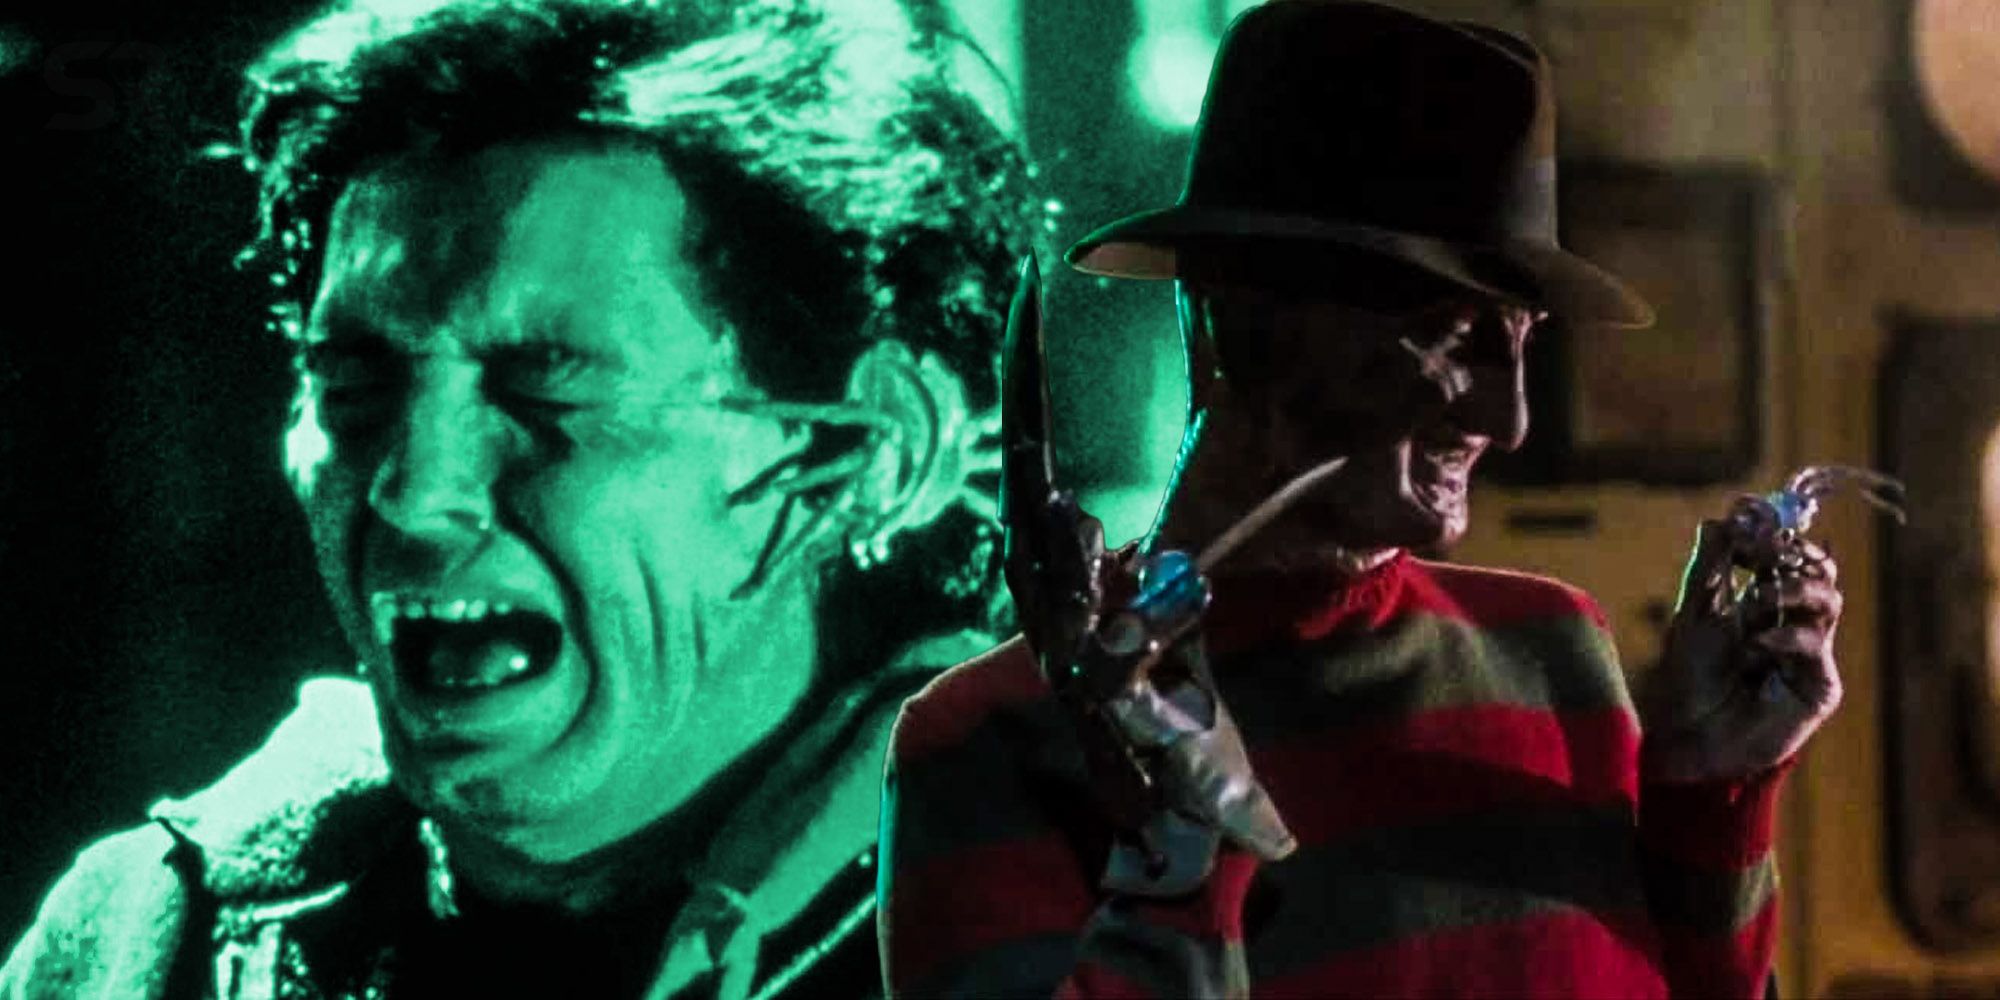 5 Reasons to LOVE Freddy's Dead: The Final Nightmare (Dread Central)